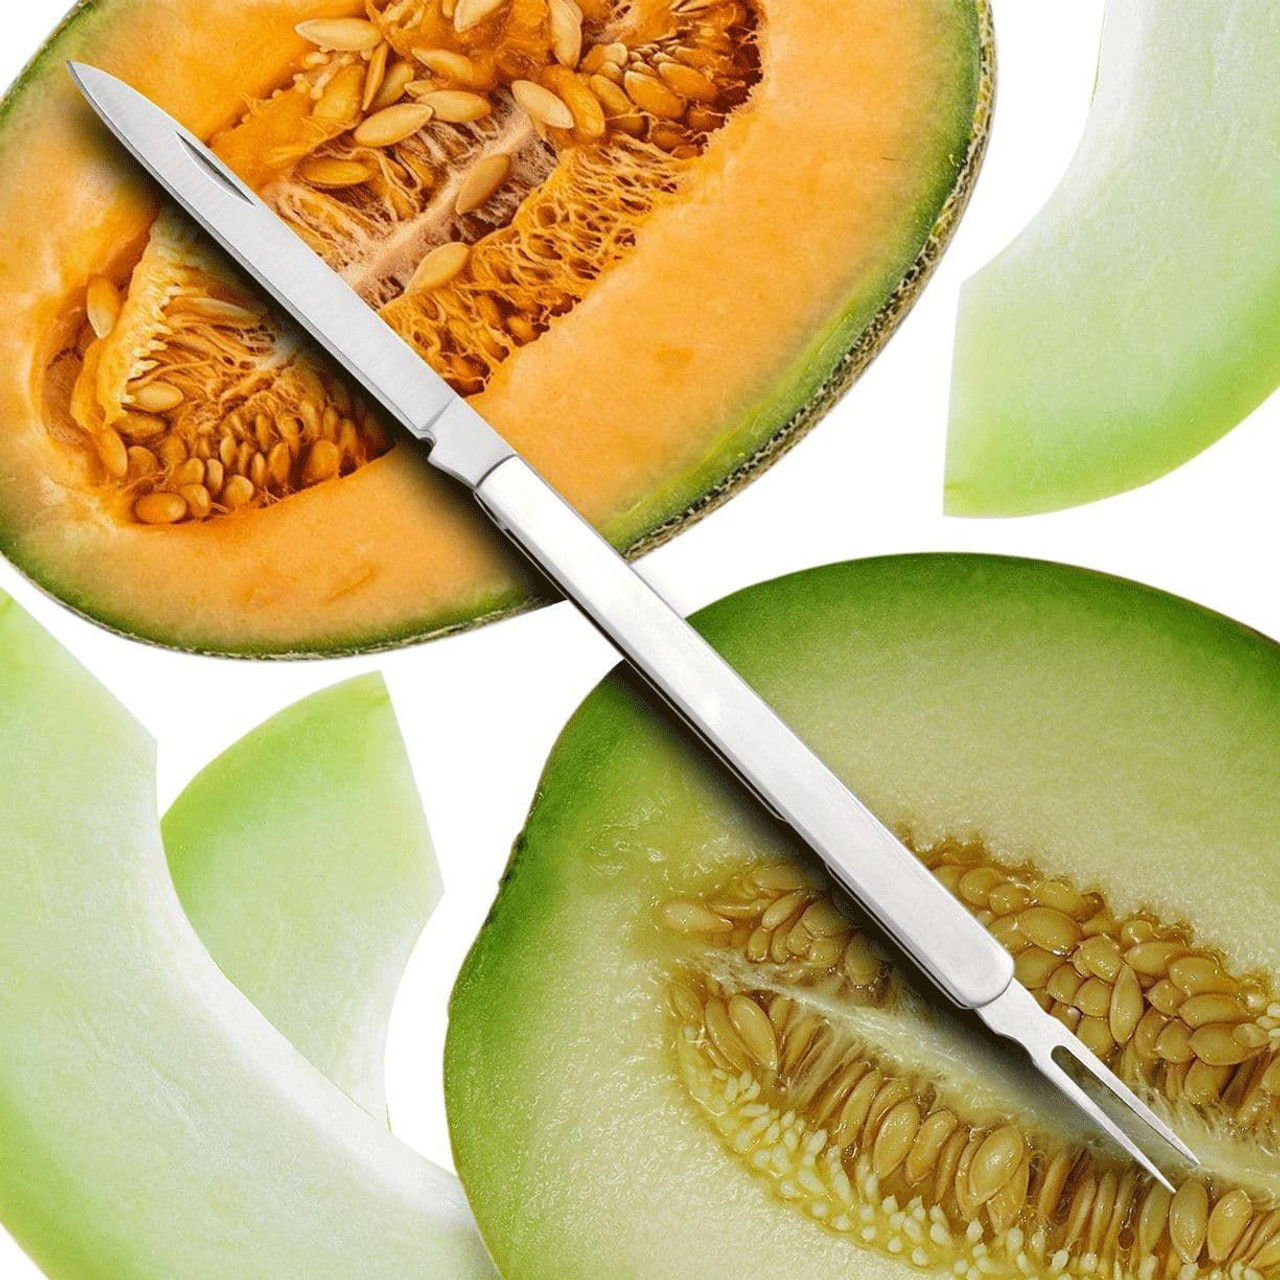 https://cdn11.bigcommerce.com/s-fy9rv139a5/images/stencil/1280x1280/products/11955/27410/0014839_folding-fruit-knife-with-fork__17948.1702731117.jpg?c=1